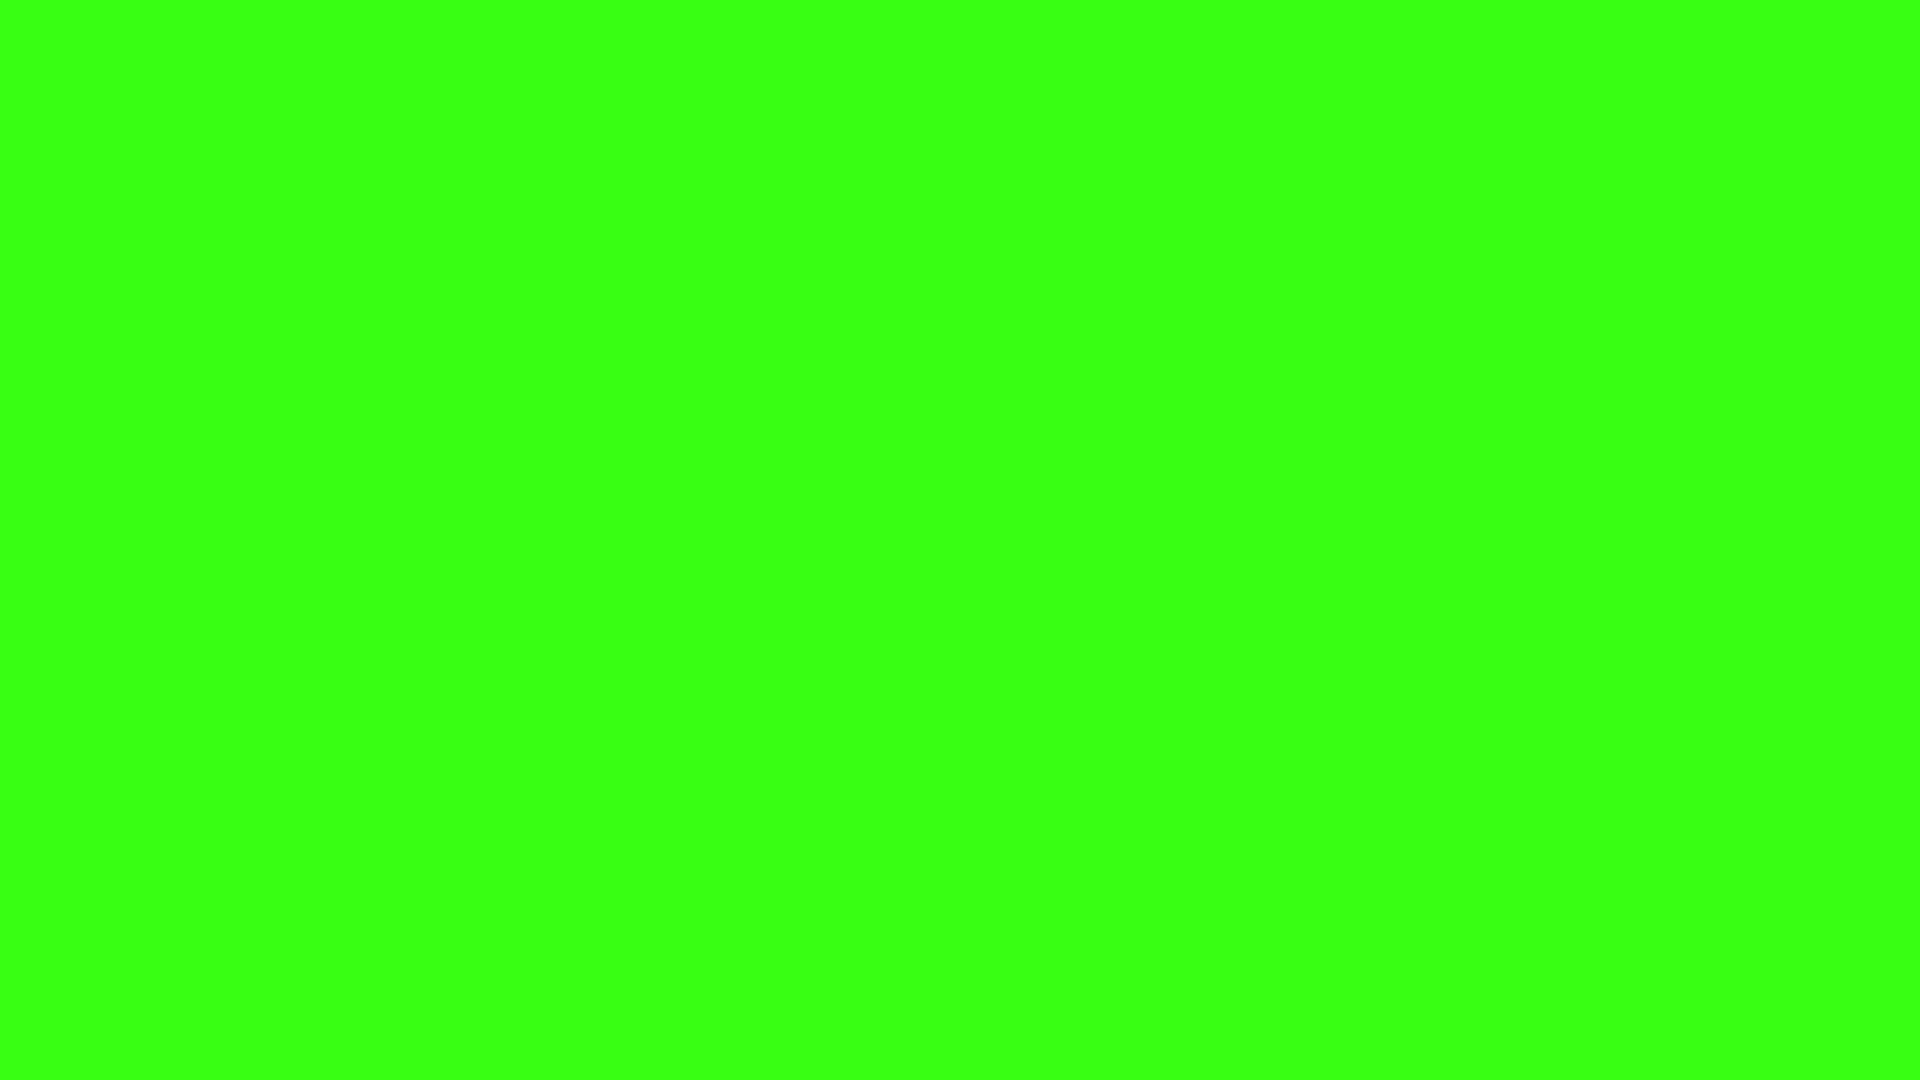 Cute Neon Green Wallpaper Green solid color background